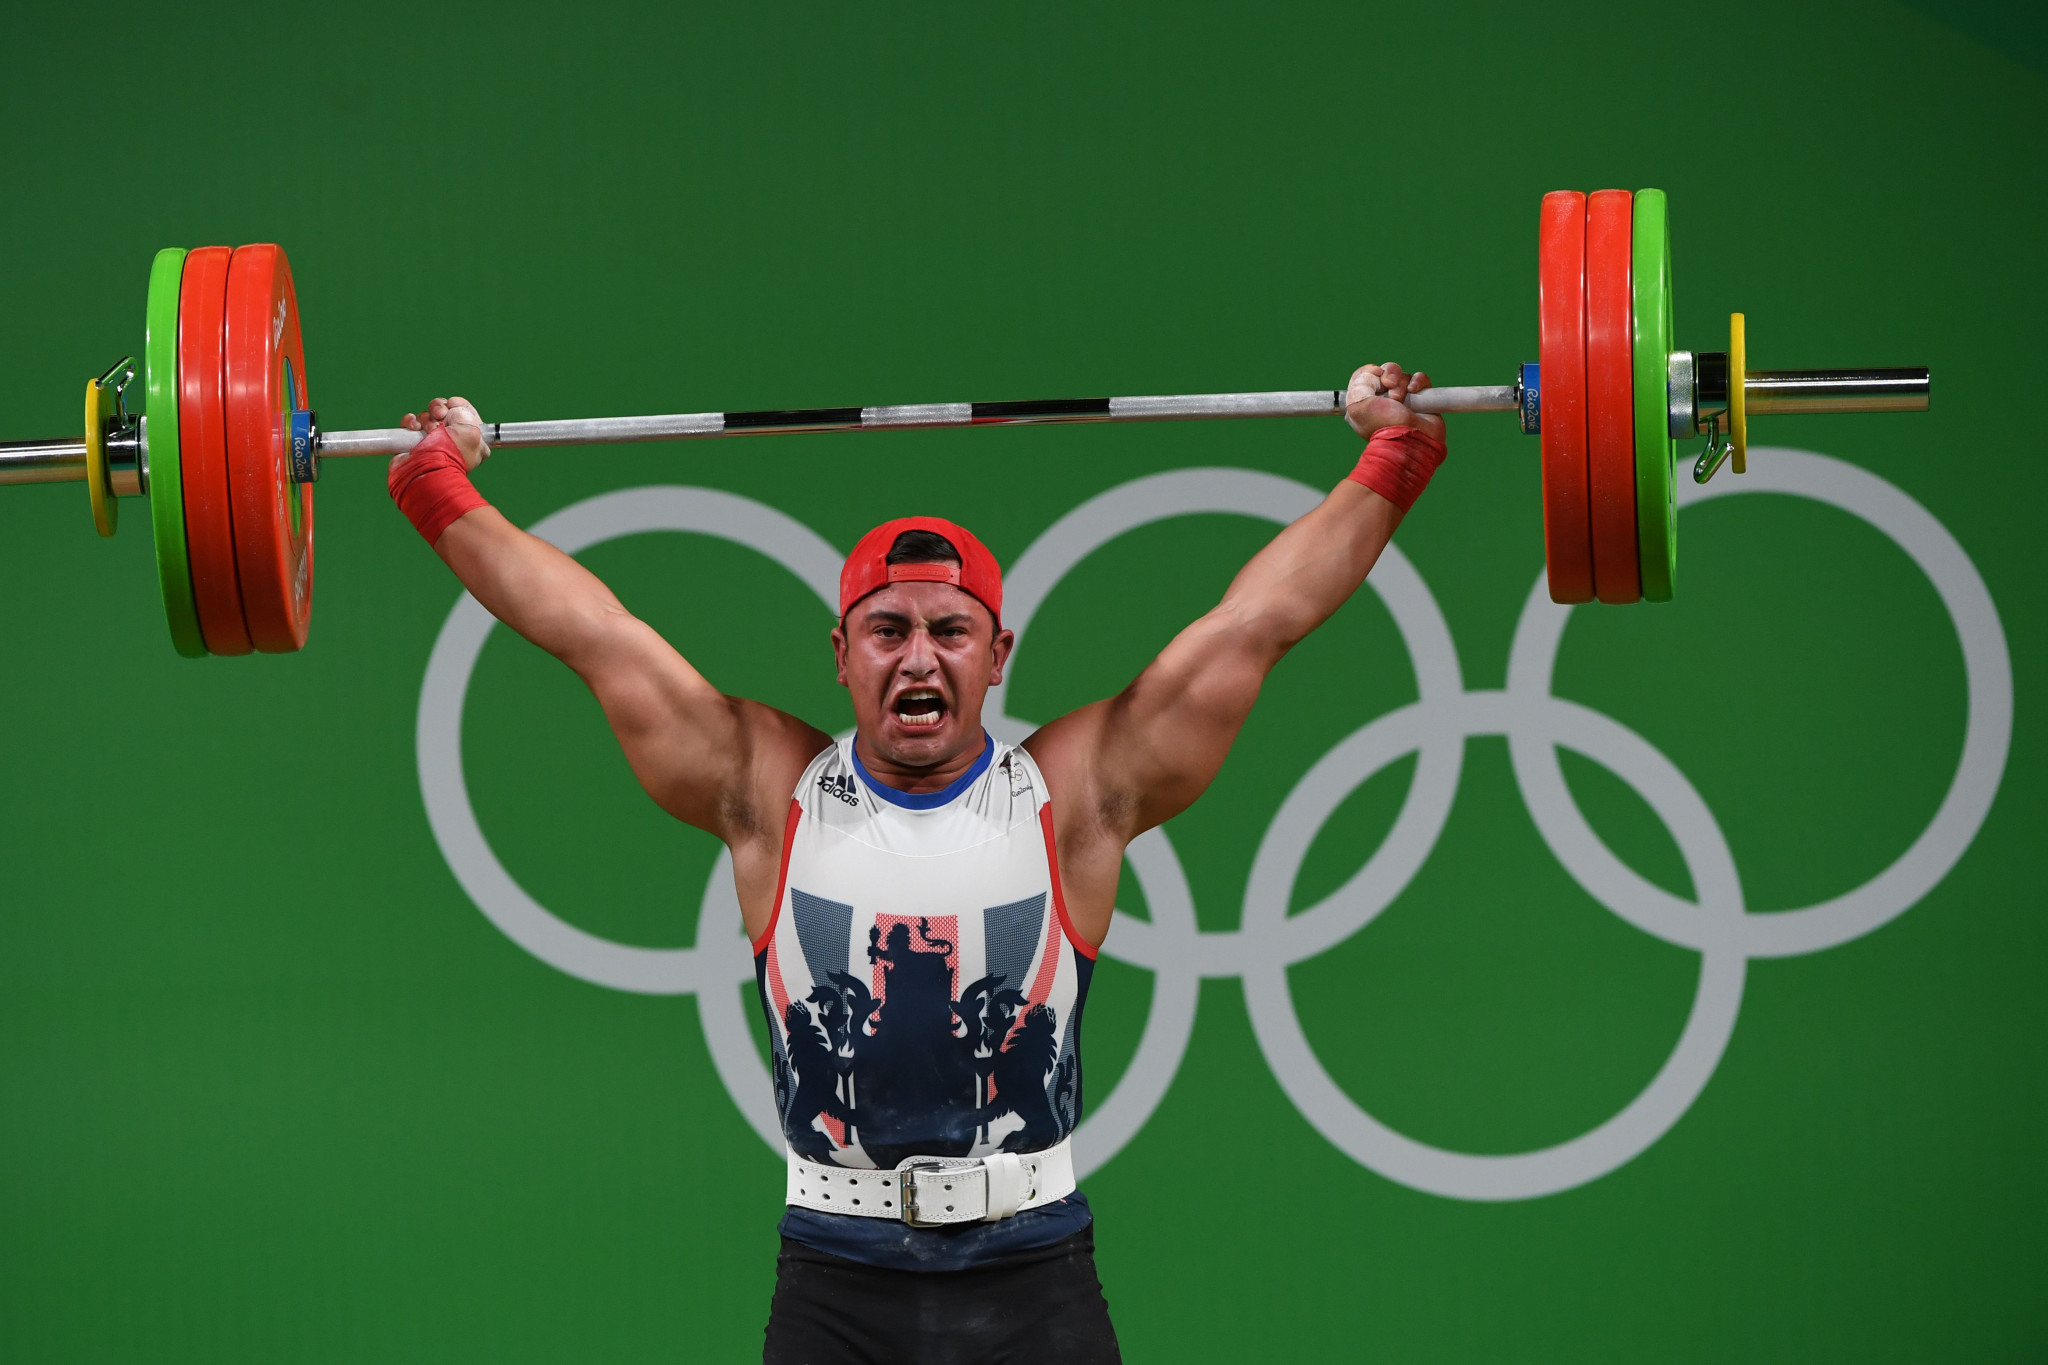 Weightlifters from New Zealand have been warned they could face a ban of up to two years if they attend training clinics run by Great Britain’s Sonny Webster ©Getty Images